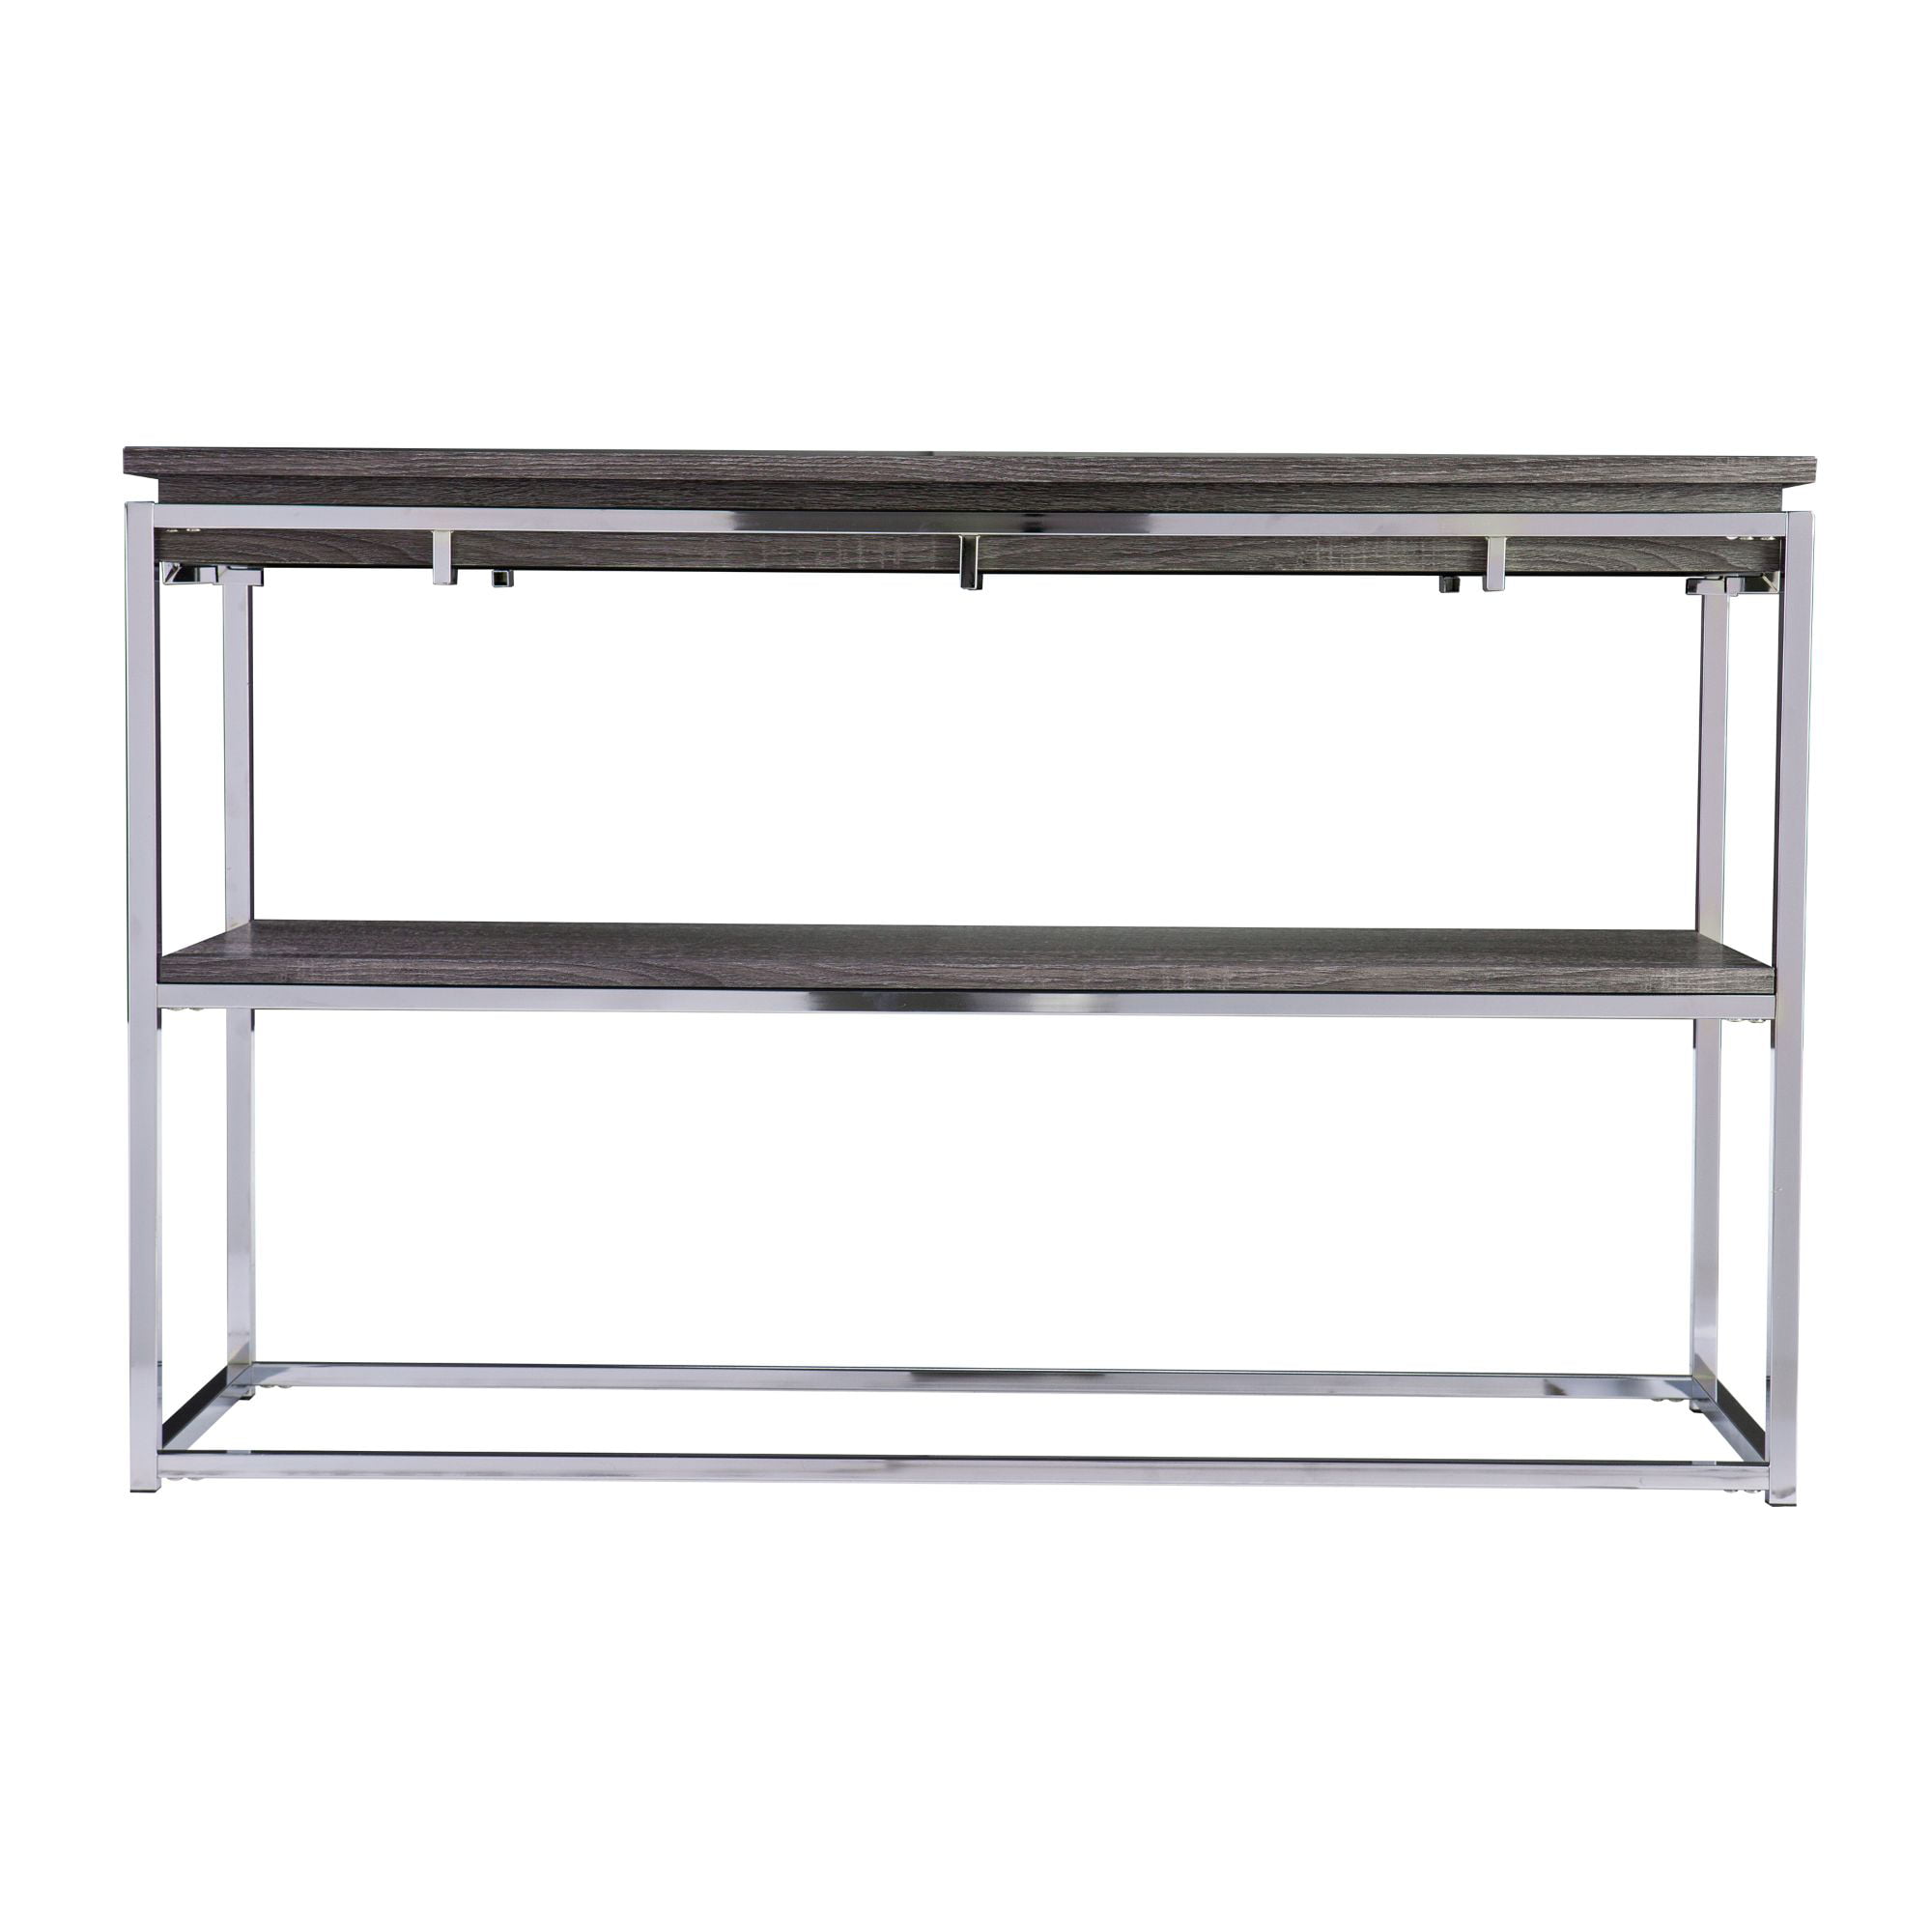 Shop 47.25" Black and Silver Contemporary Two Tier Rectangular Top Console Table from Walmart on Openhaus